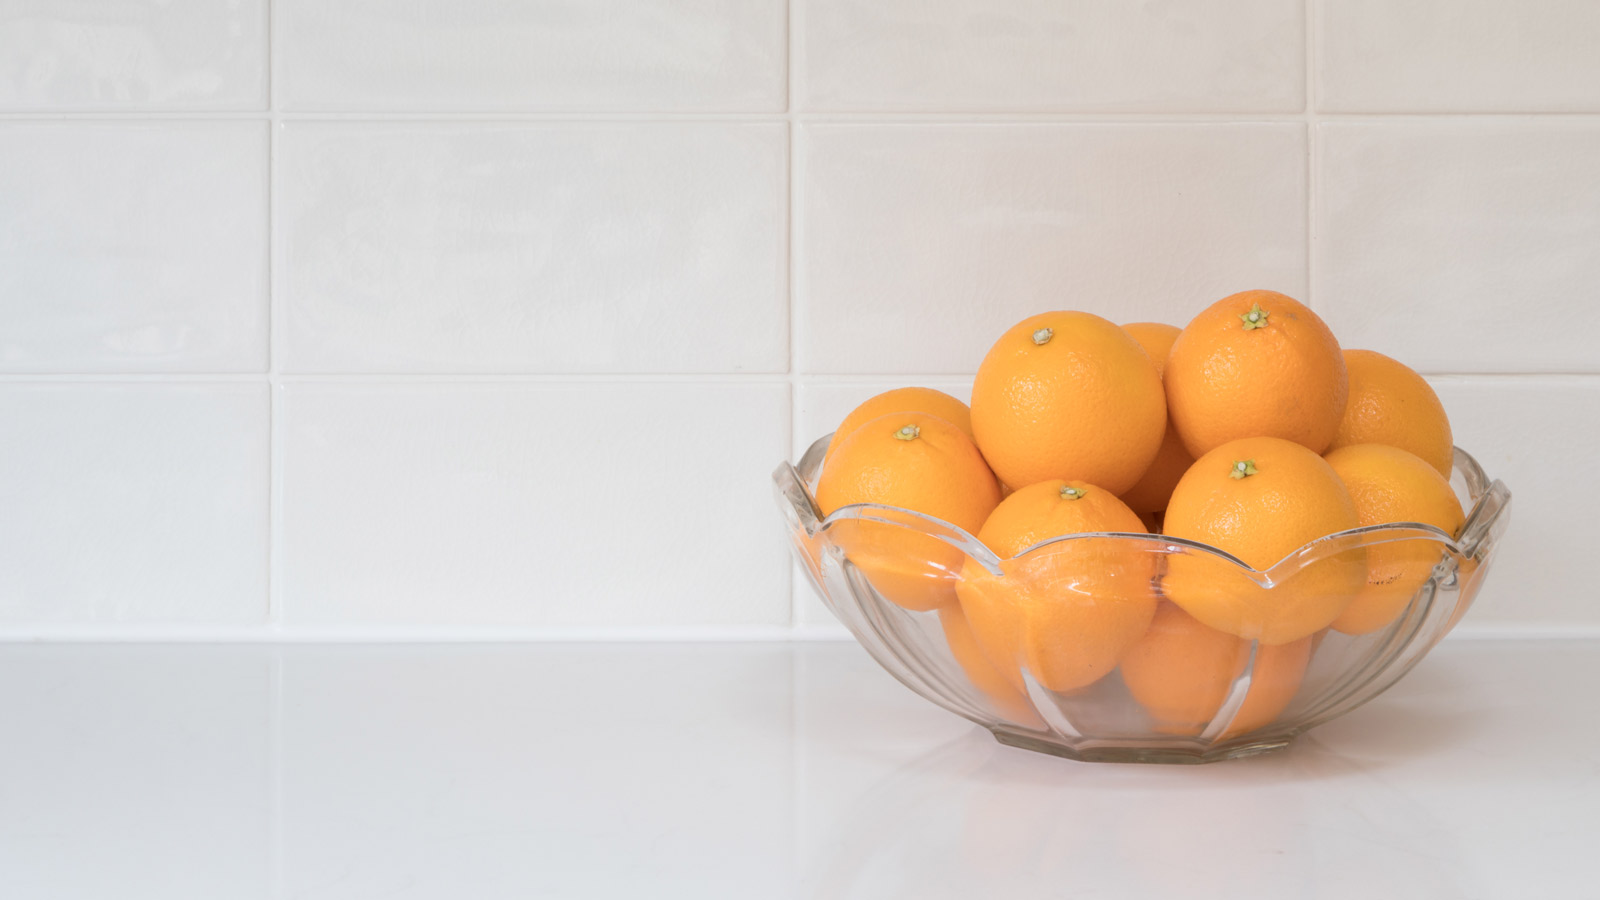 A dish of citrous fruit on a kitchen worktop ready for clove orange pomanders